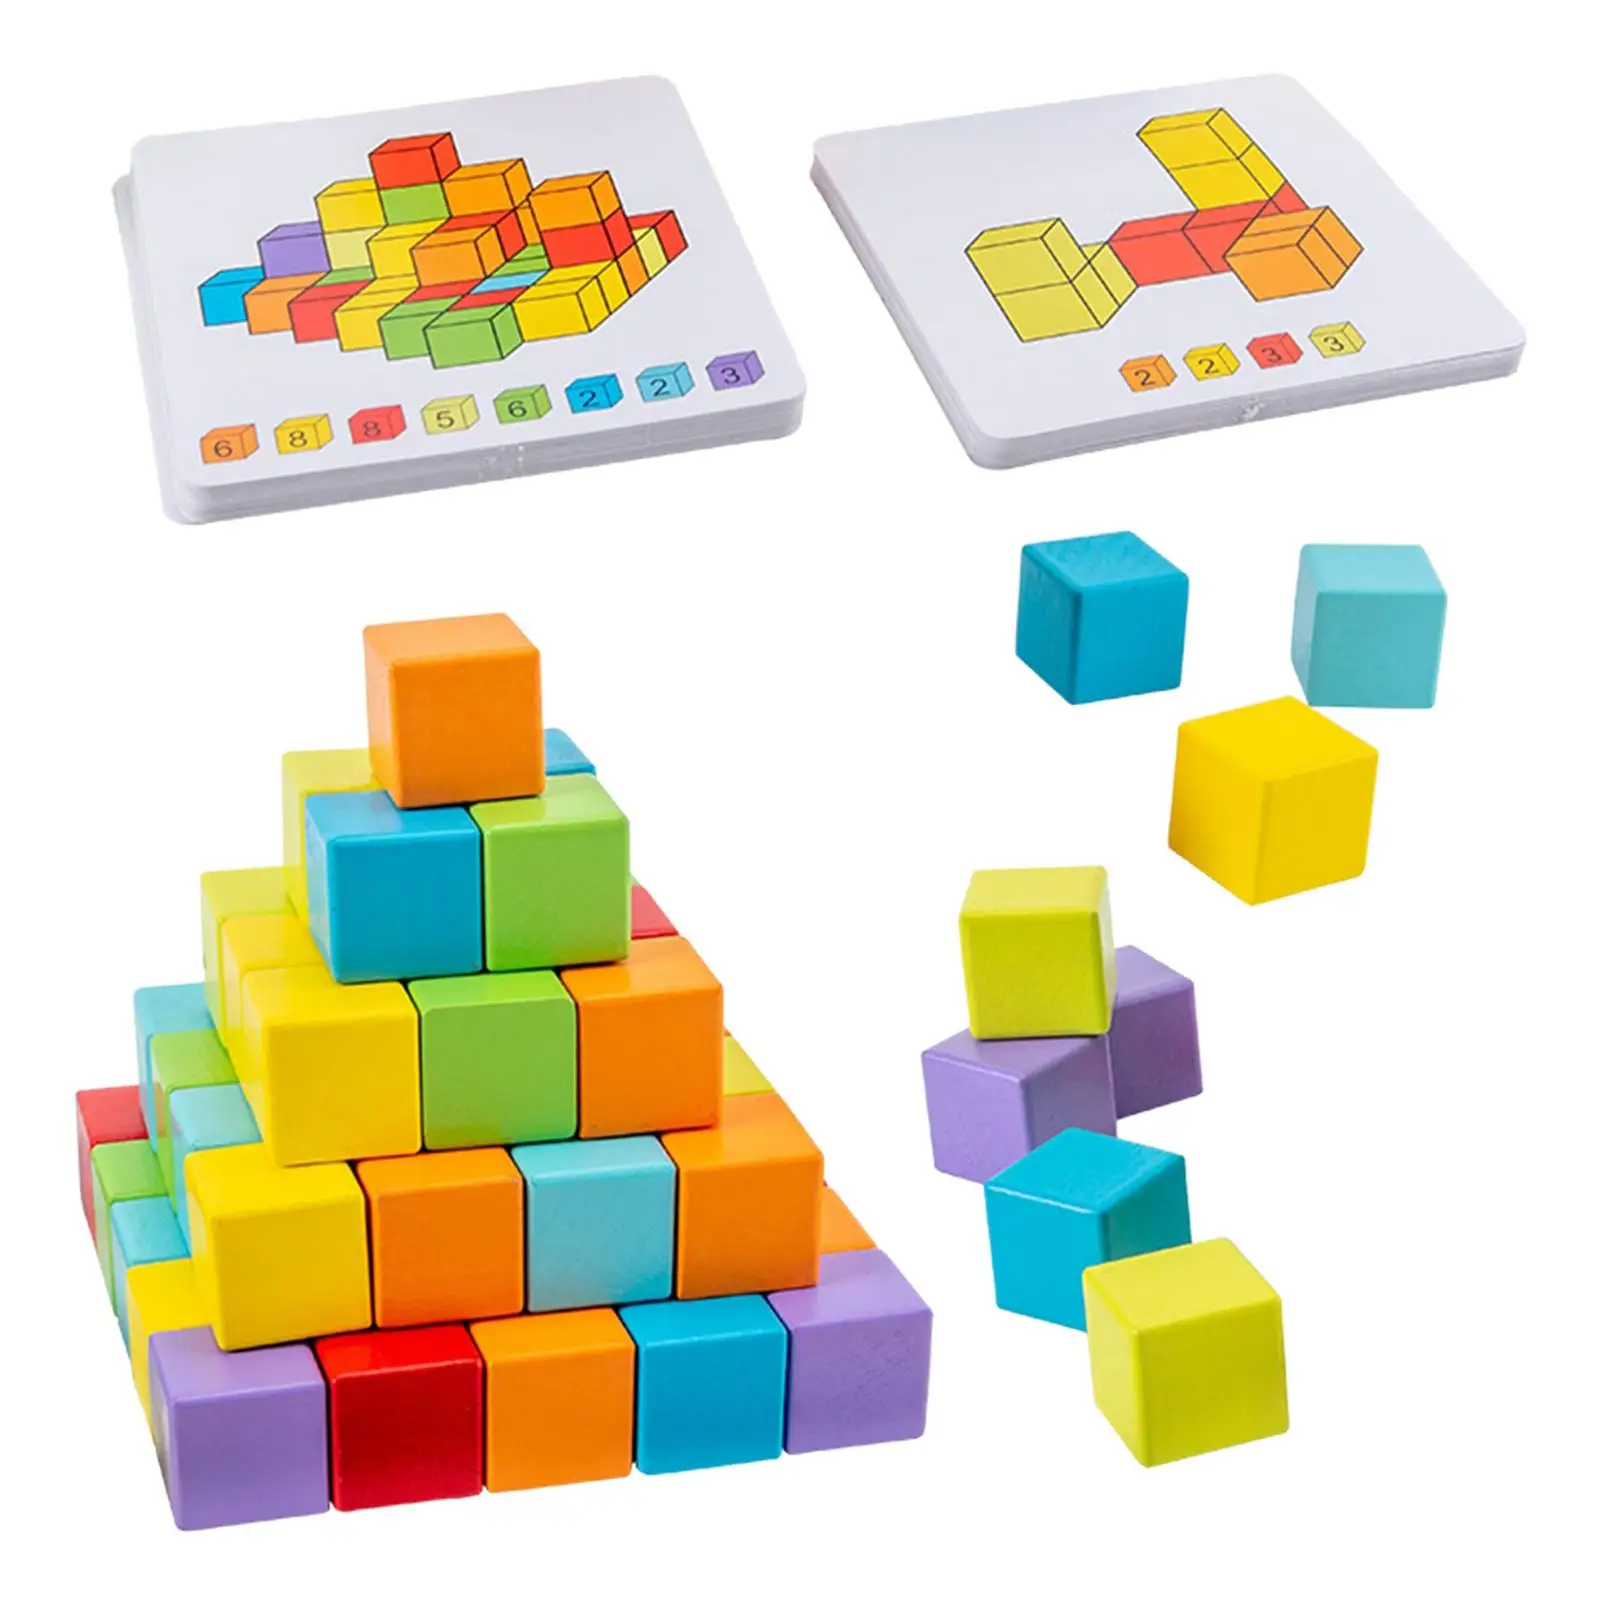 Wooden Building Blocks Stacking Game with Double Sided Cards Sensory Toys,